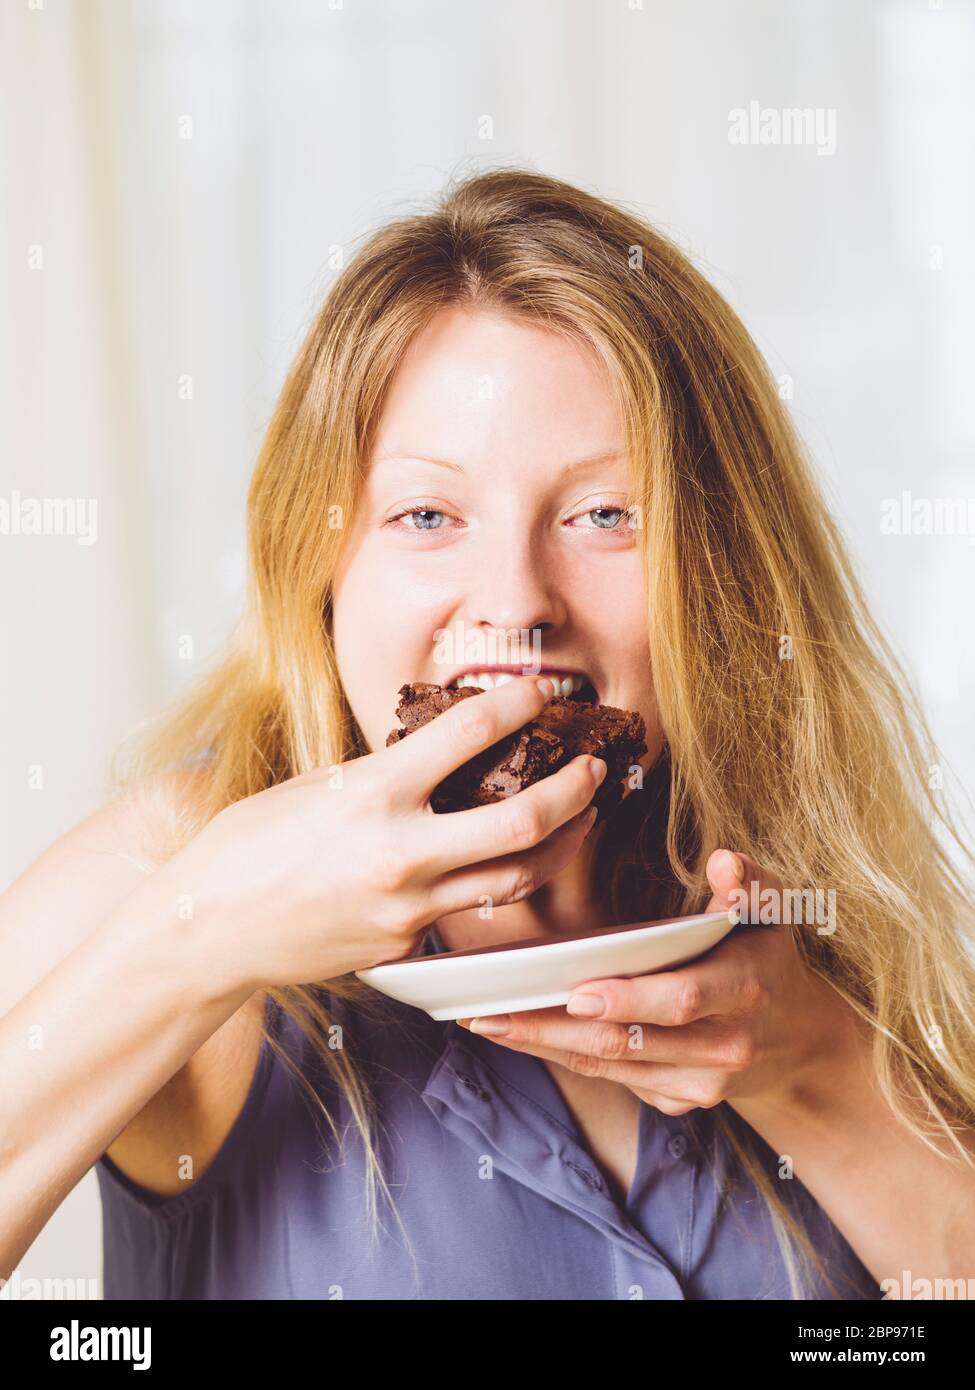 Photo of a beautiful blond woman in her early thirties with log blond hair eating a large piece of brownie or cake. Stock Photo